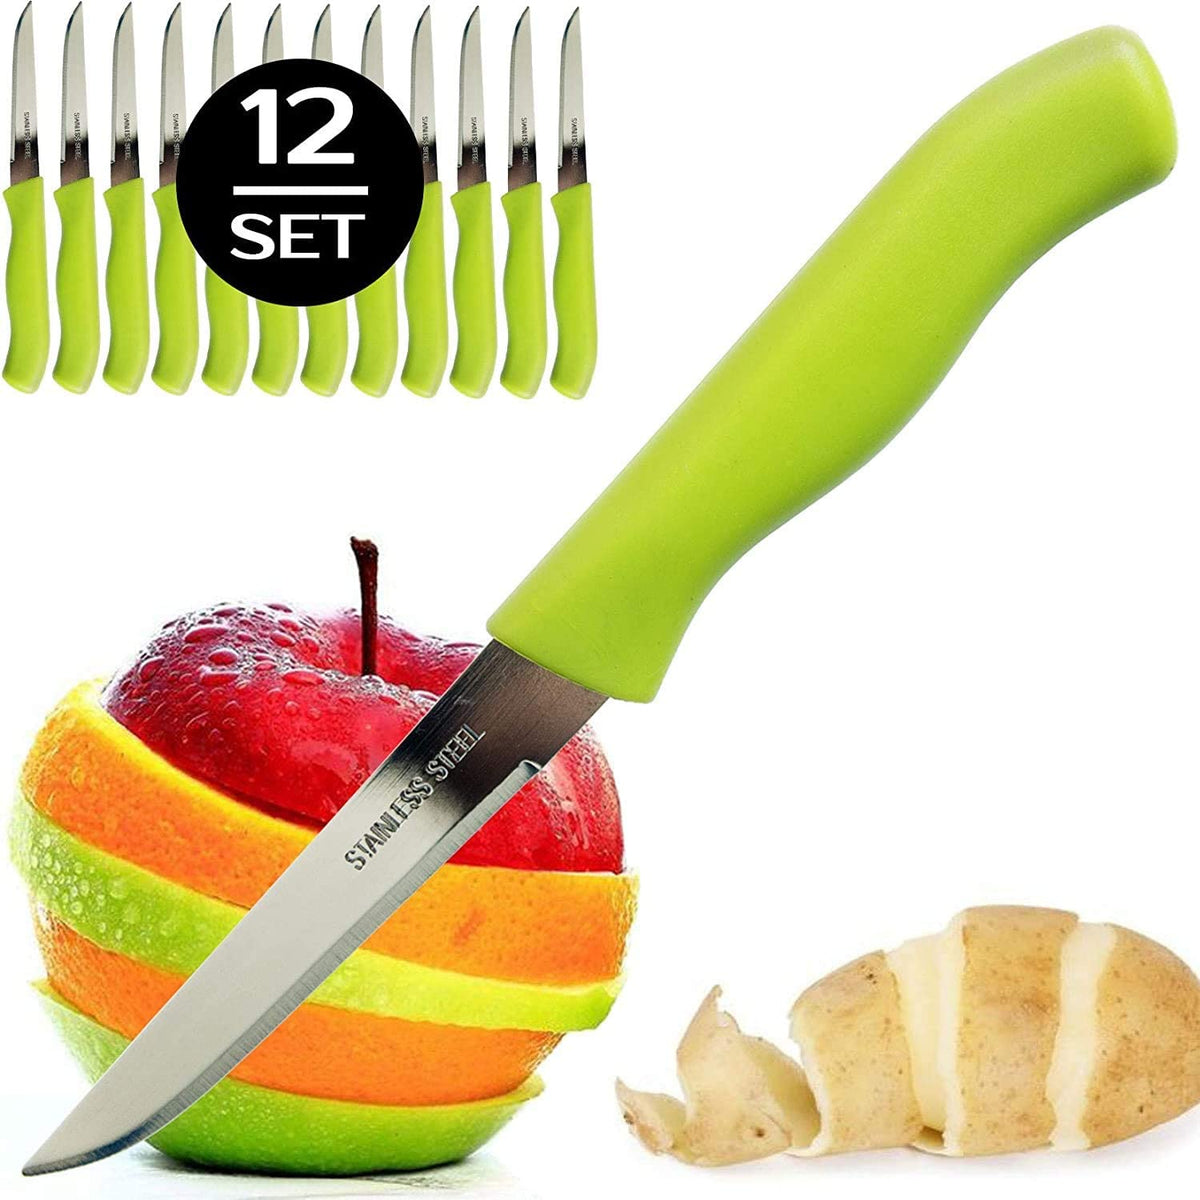 Brenium Paring and Garnishing Knife, 12-Piece Set, 3 inch Blade, Fruits, Vegetable, Cutting, Peeling, Size: Total Knife 6.5 in Blade Length: 3.0 in